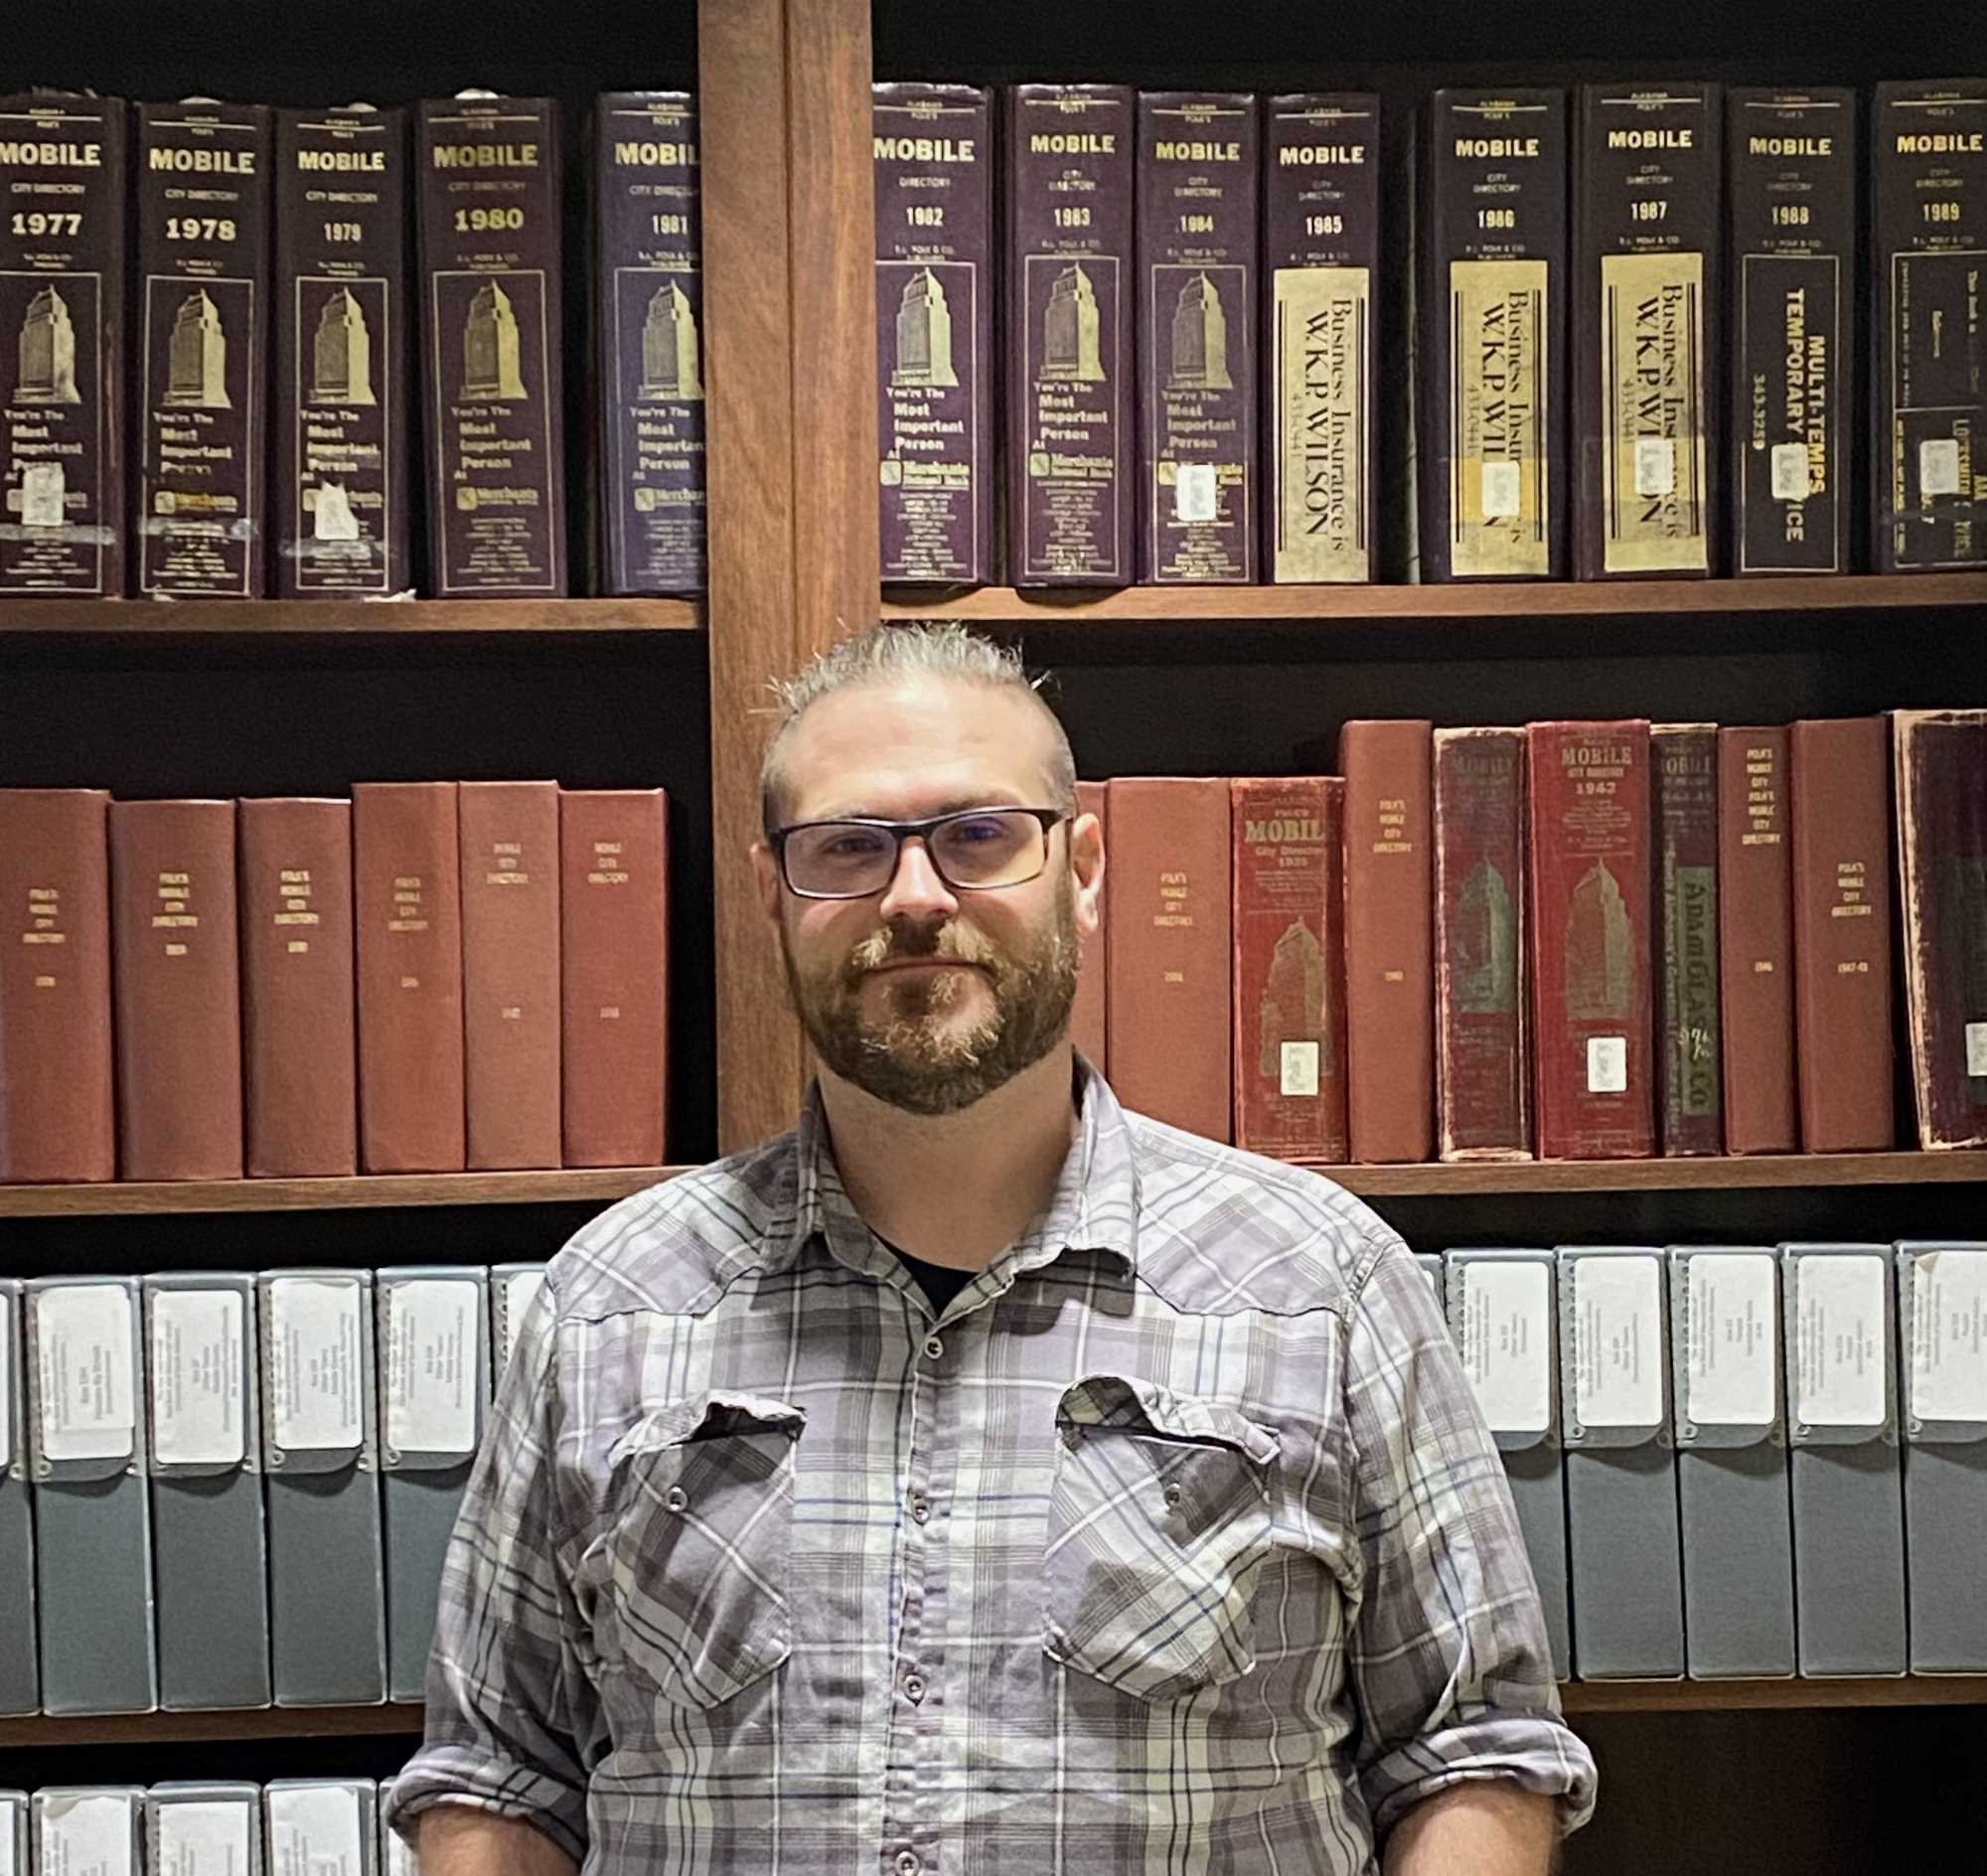 Daniel Shemwell is pictured standing in front of book cases in the McCall reading room.